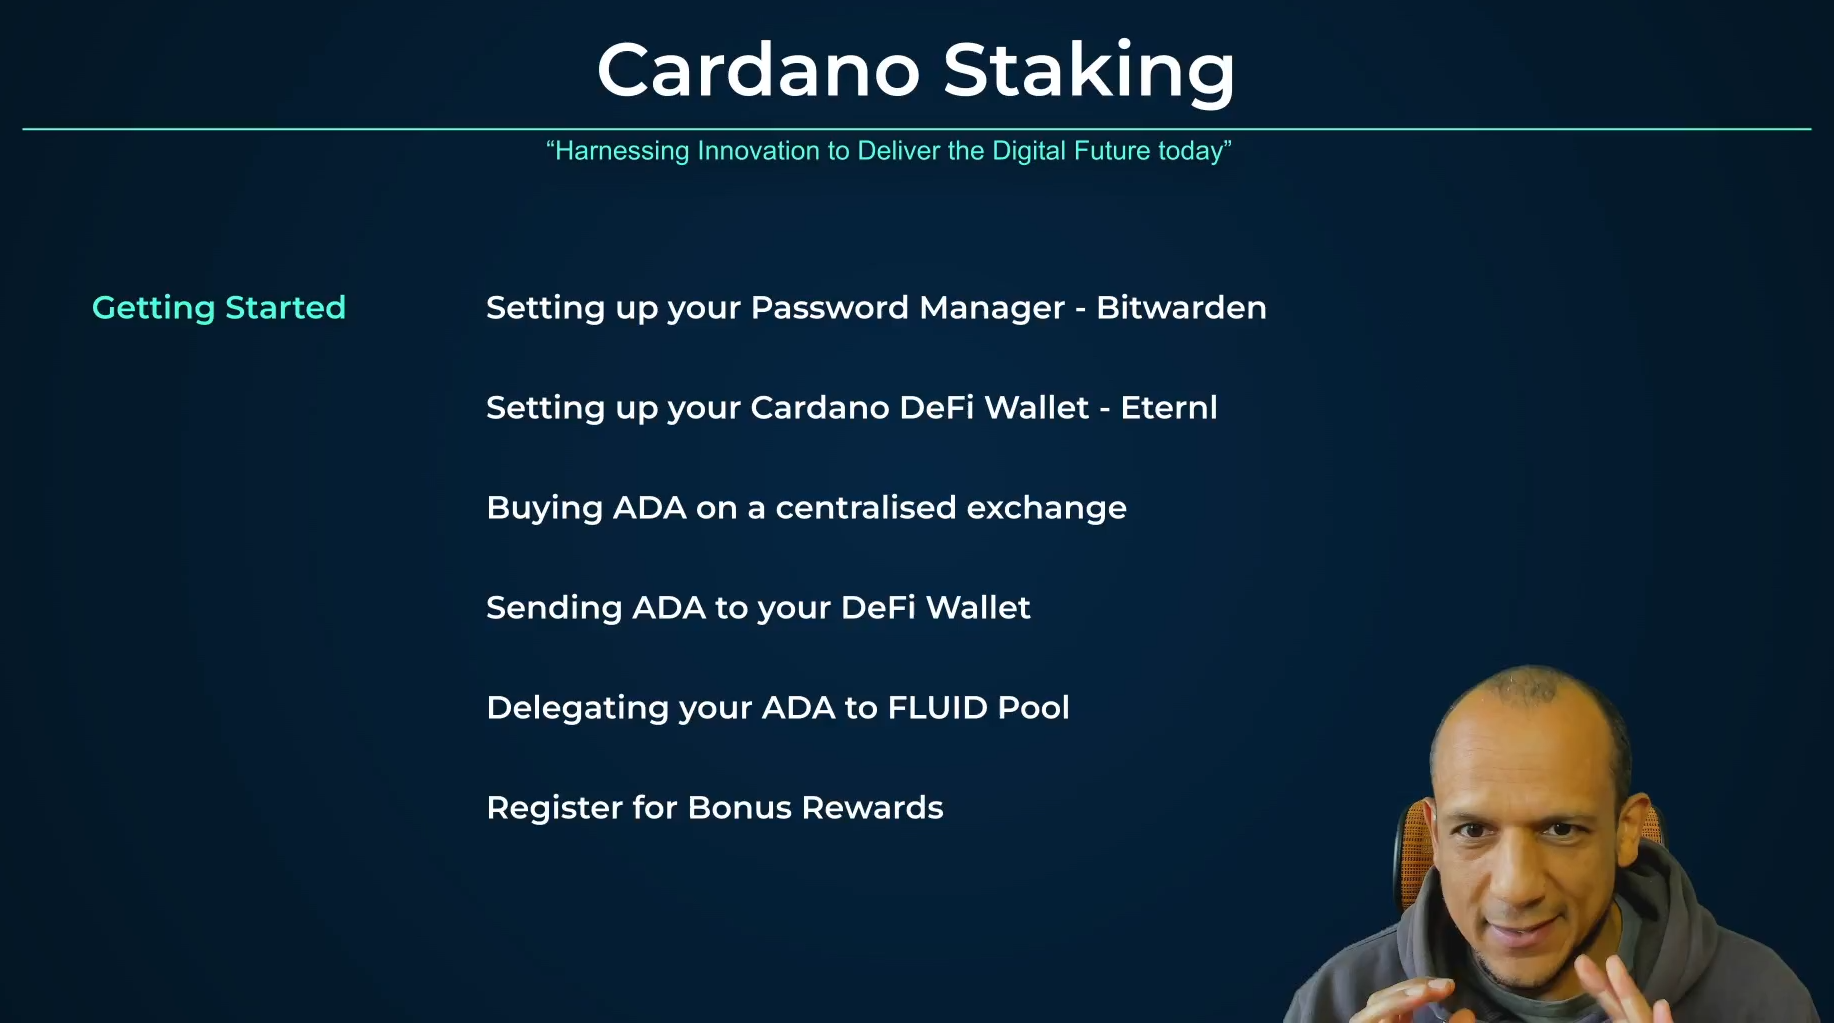 Our 30 minute guide to Cardano Staking